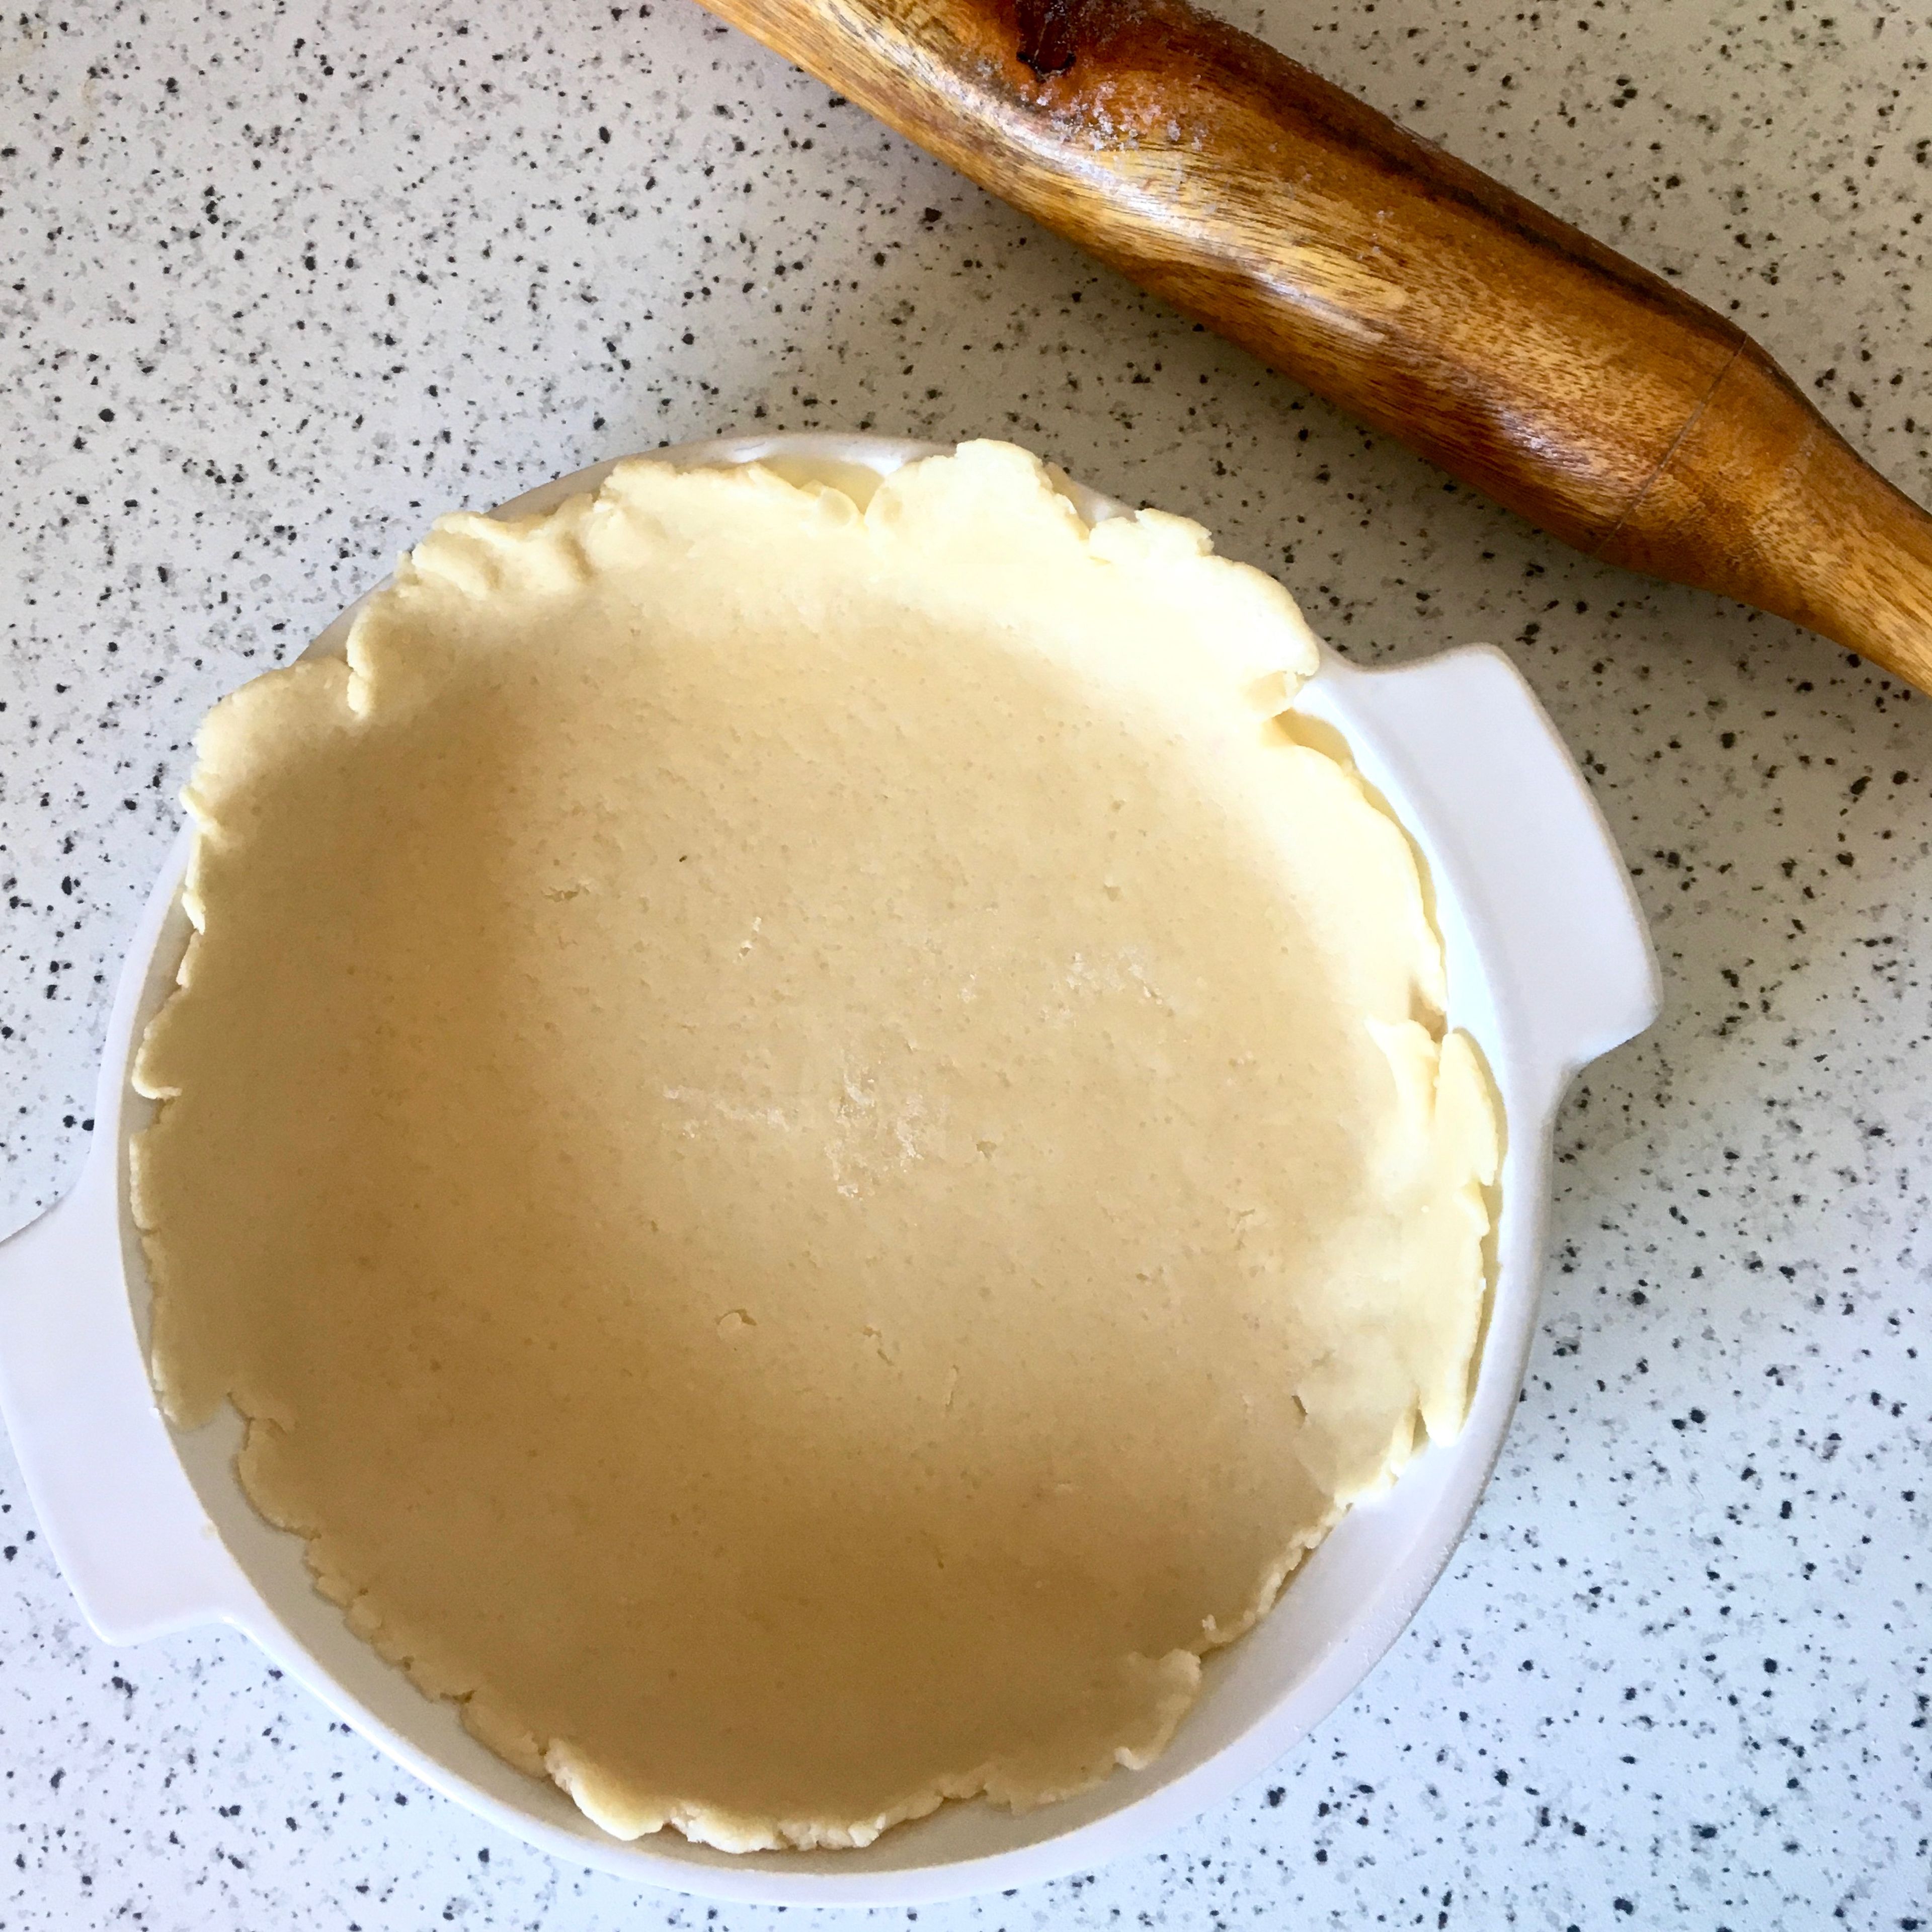 Heat the oven to 180 C. Flour your work surface and rolling pin. Roll out one of the refrigerated dough pieces into a 2-3 mm thick circle, large enough to cover the bottom and sides of a pie dish. Transfer to the dish and trim the excess. Add the cream mixture over the pie crust and distribute evenly.